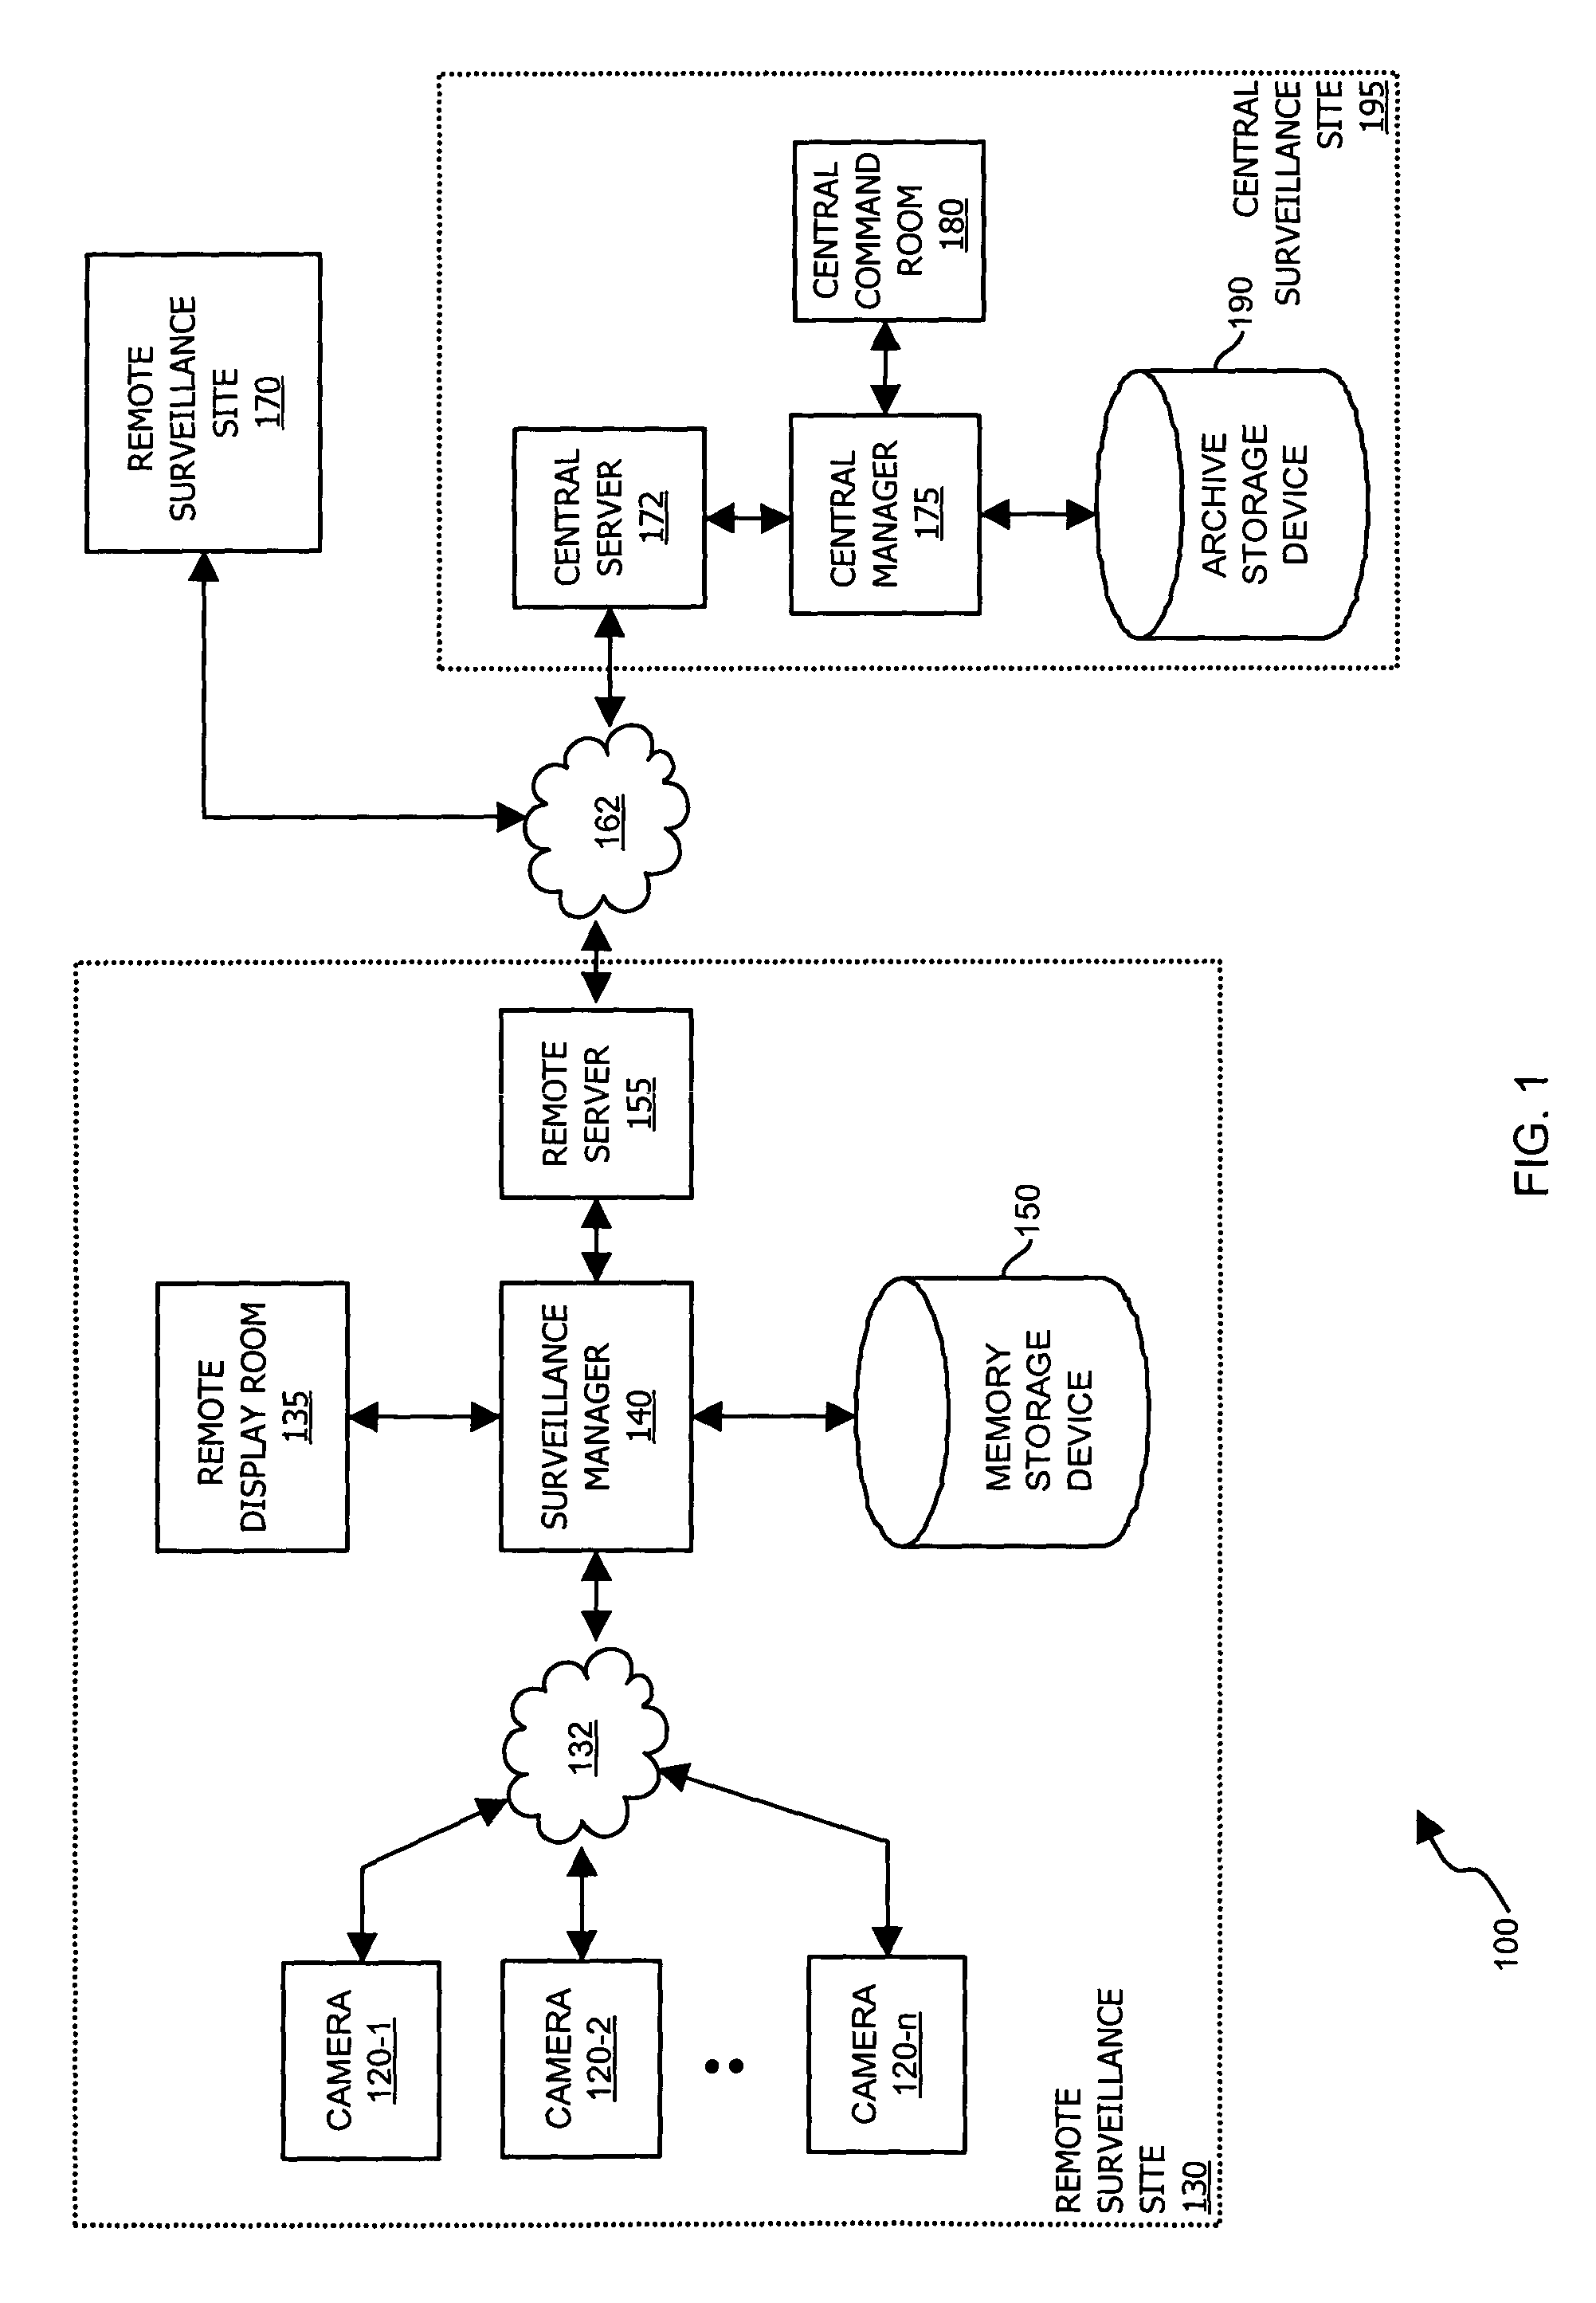 Methods and apparatus for use in surveillance systems